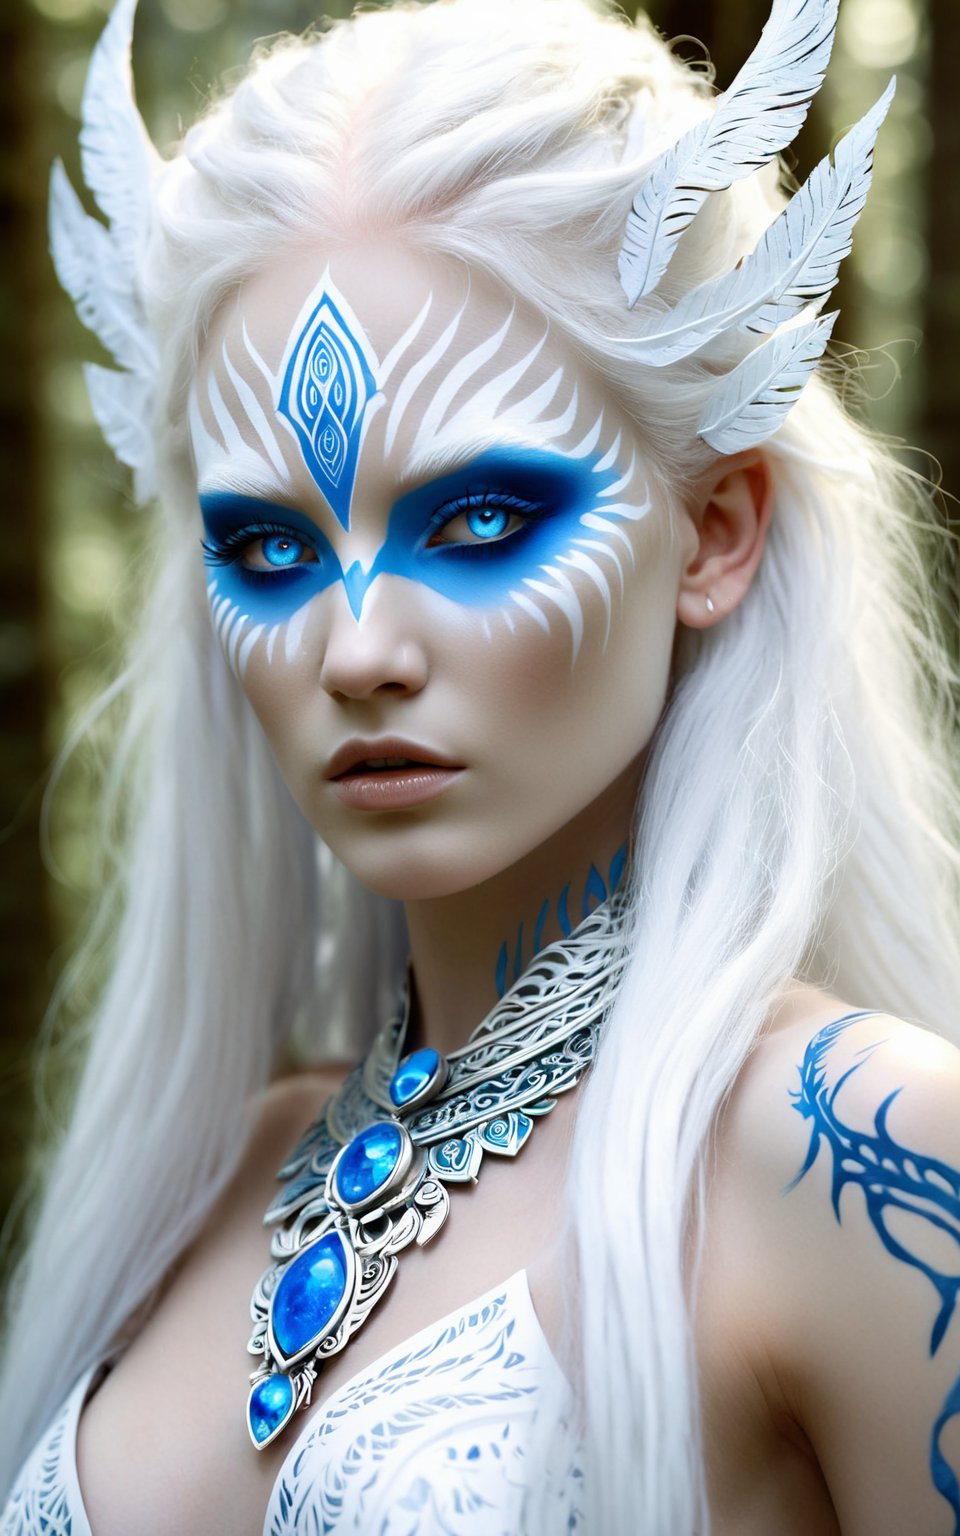 (best quality, 8K, highly detailed, ultra-detailed, masterpiece, beautiful), (fantasy, female, forest, mystical, ethereal), an albino woman with long, flowing silver hair and striking bright blue eyes. She has intricate blue and white face paint with tribal designs. She is adorned with blue and silver jewelry, including earrings and a necklace. The background features a forest with soft, dappled sunlight filtering through the trees, adding to the mystical and ethereal atmosphere.